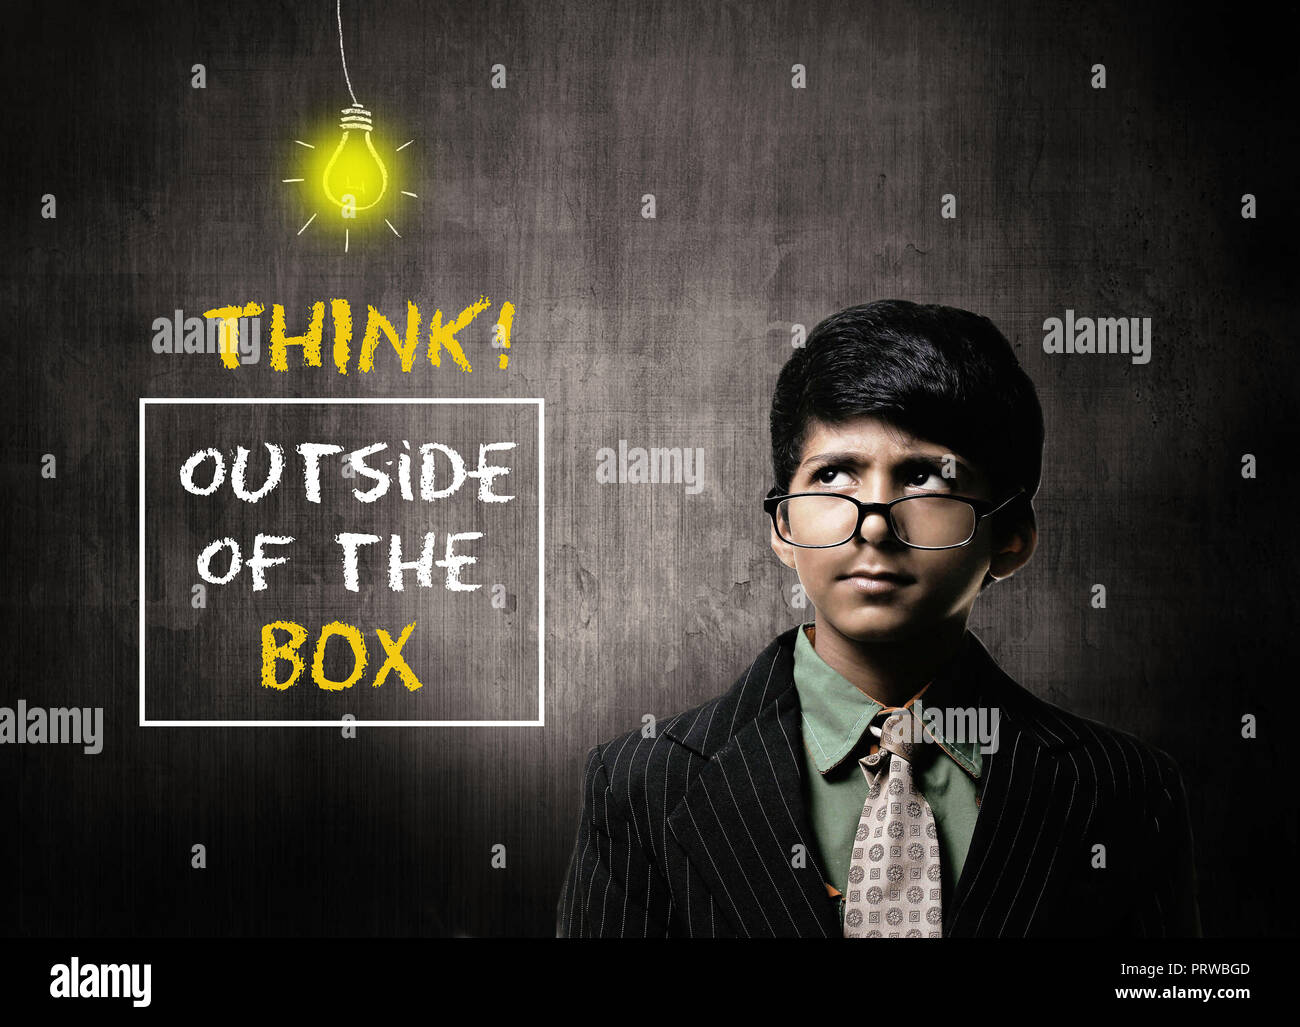 Cute Intelligent Little Boy Wearing Glasses On Nose, Thinking While Standing Before A Chalkboard, Think Outside Of The Box Written On Board Stock Photo